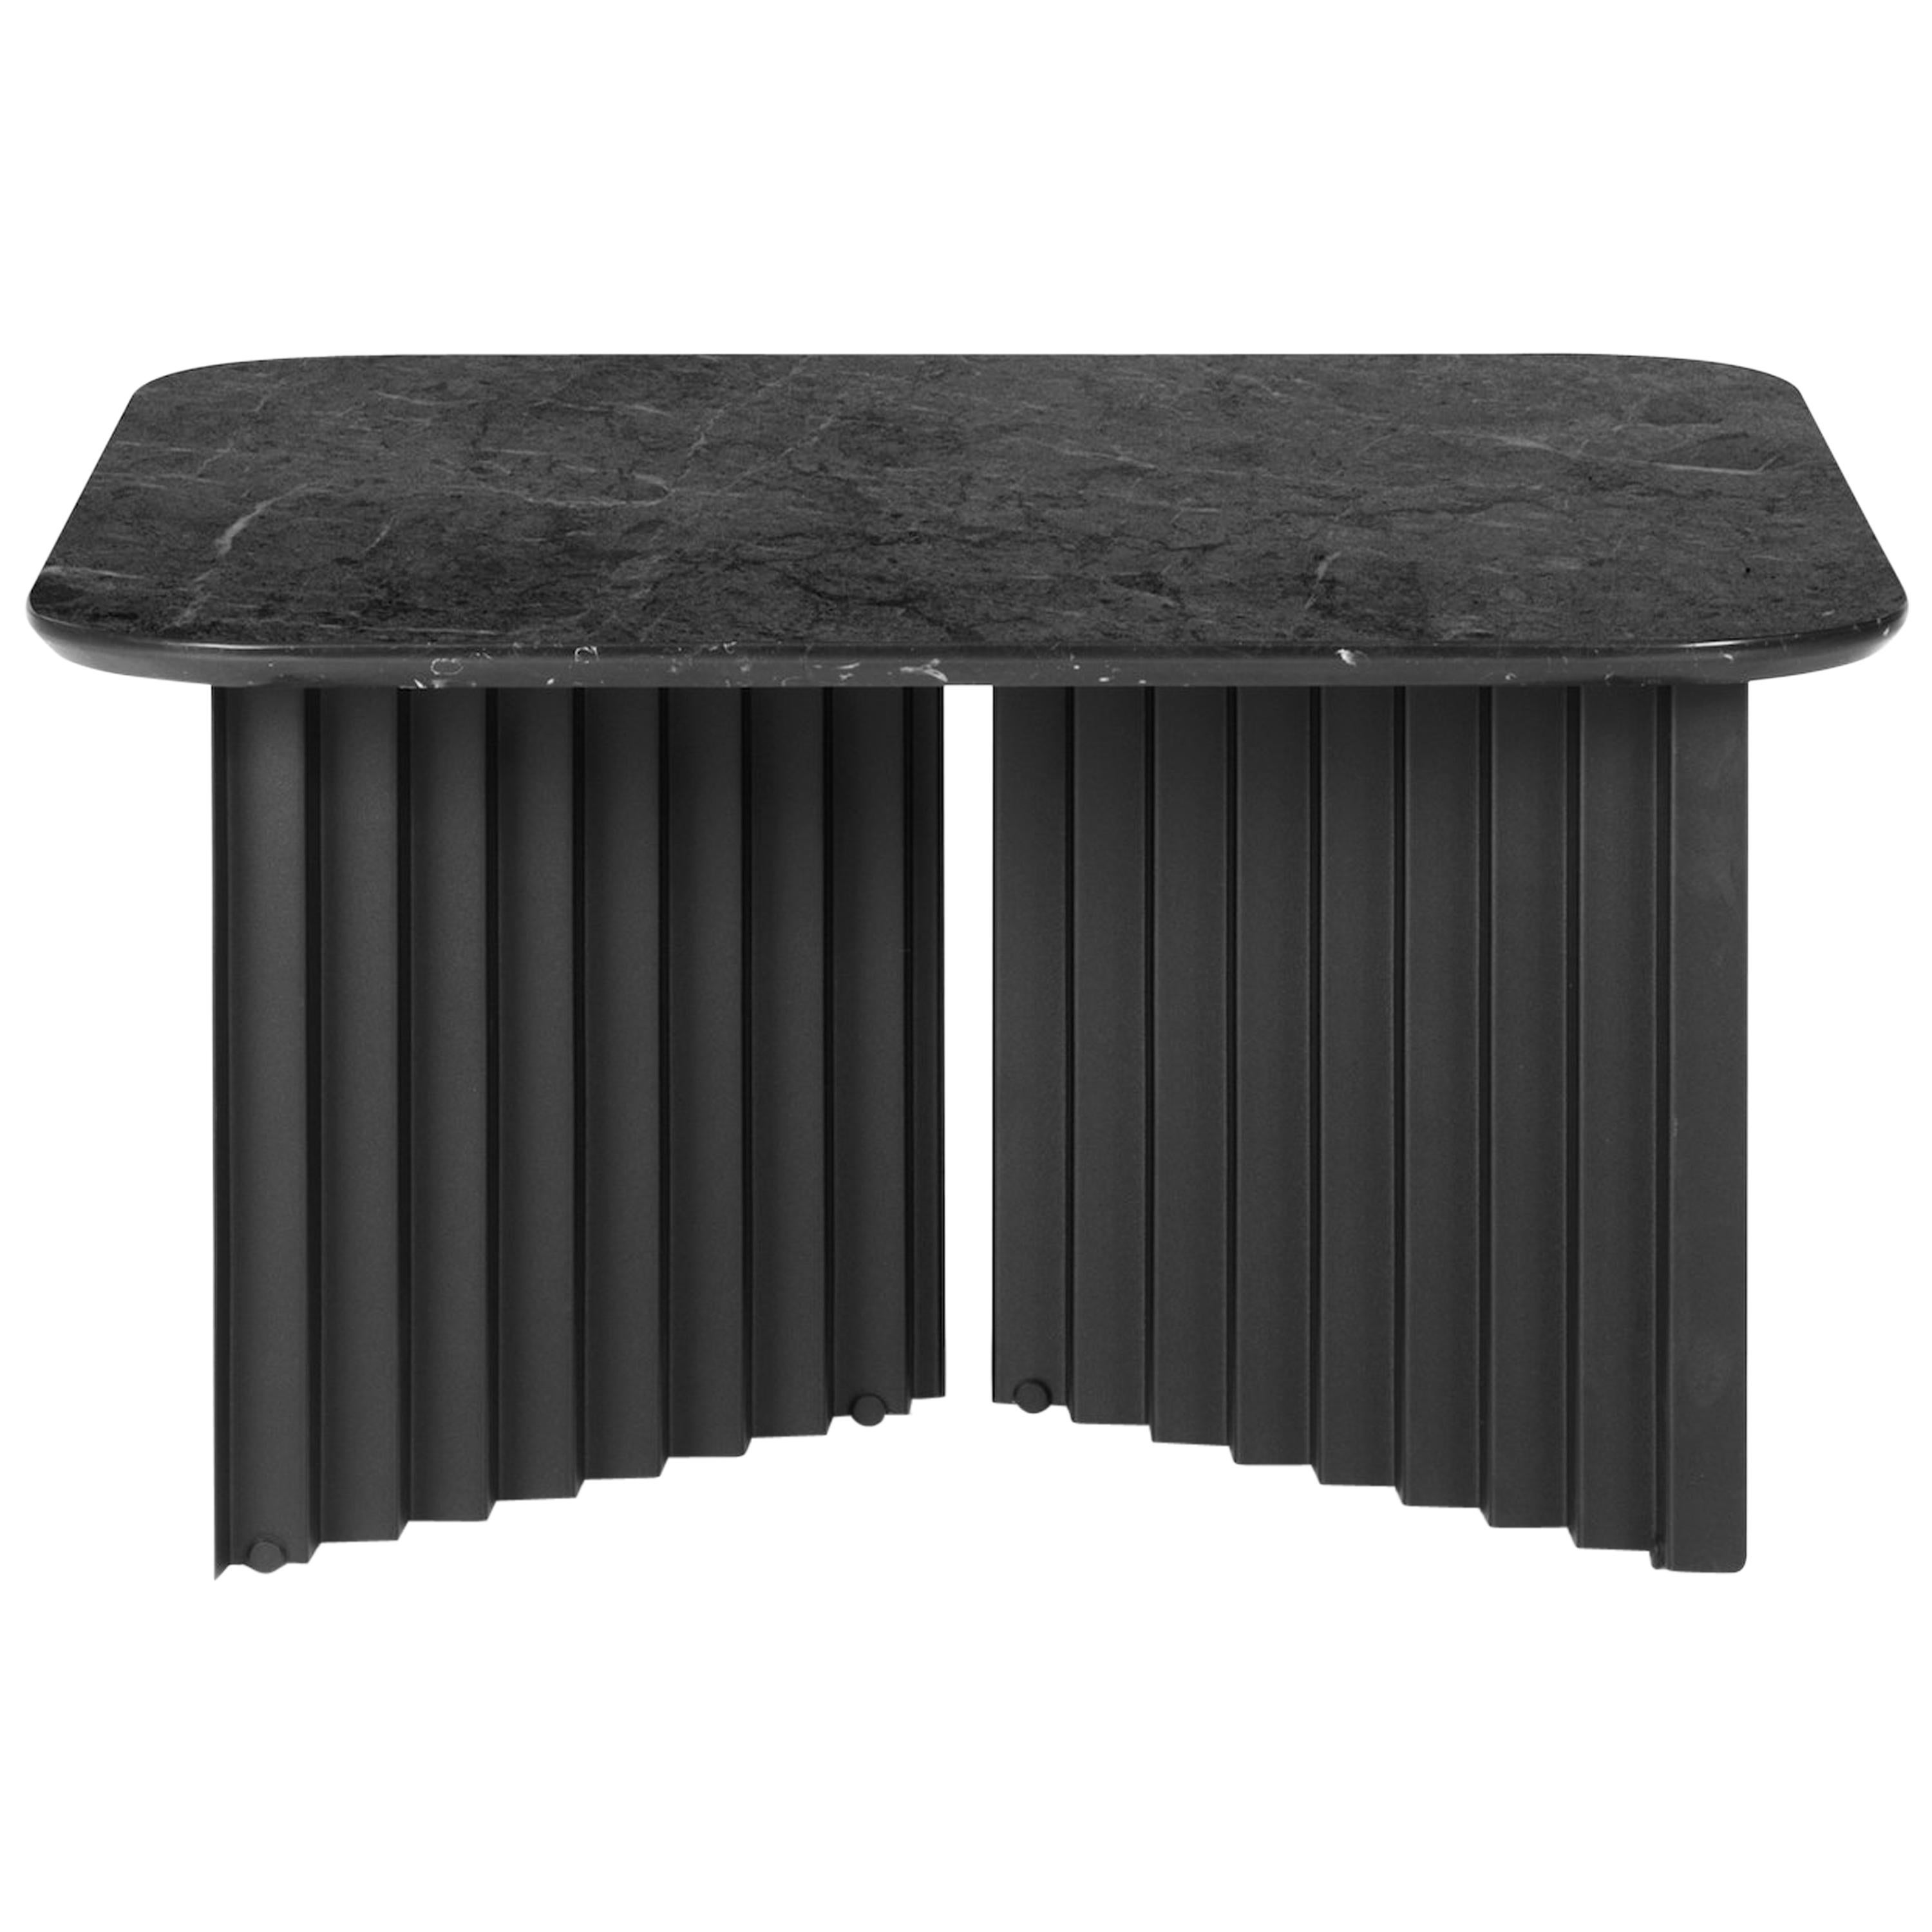 RS Barcelona Plec Medium Table in Black Marble by A.P.O. For Sale